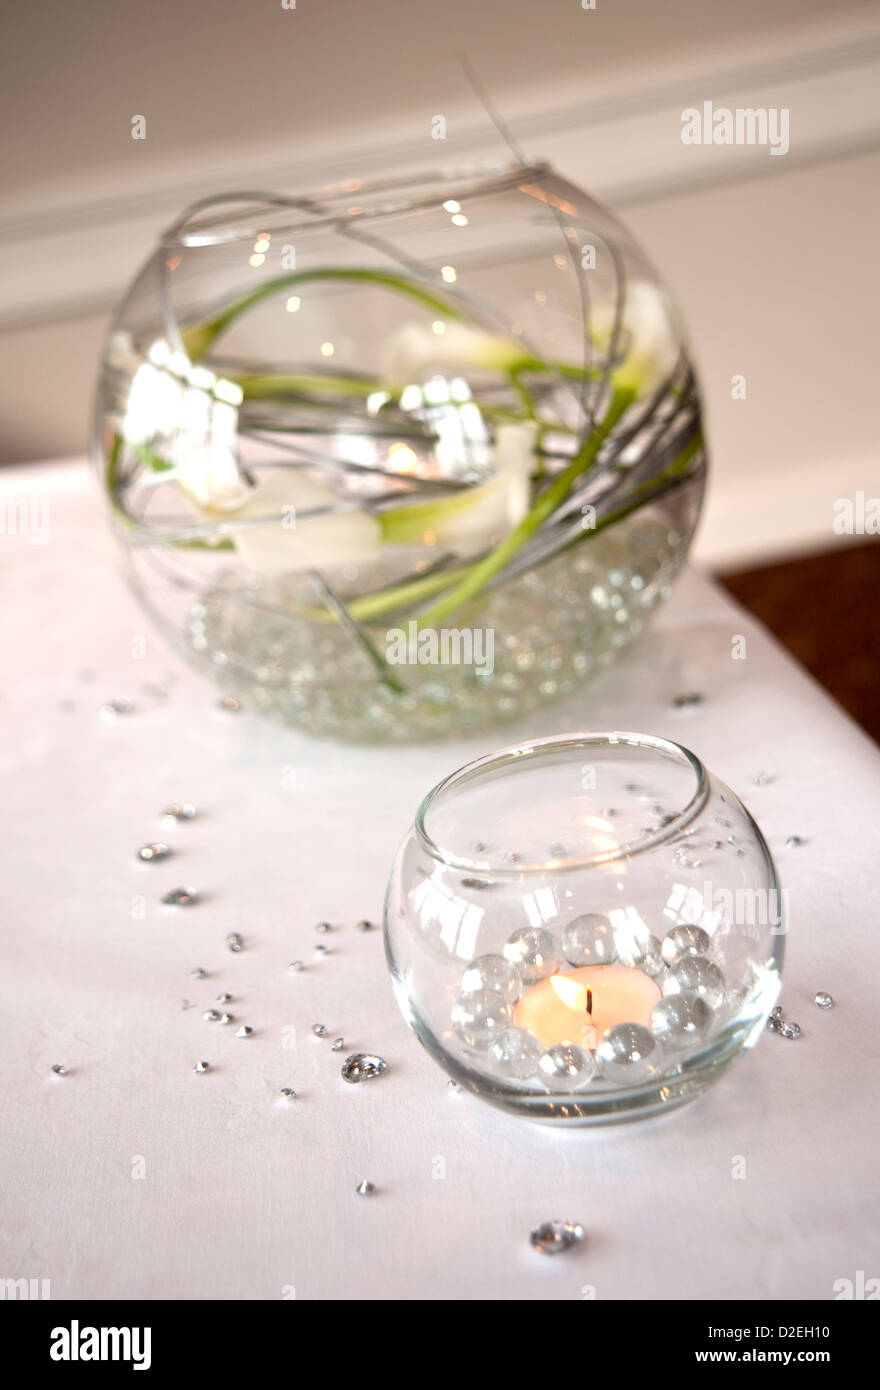 Candles and flowers in bowls to decorate a table at a wedding Stock Photo